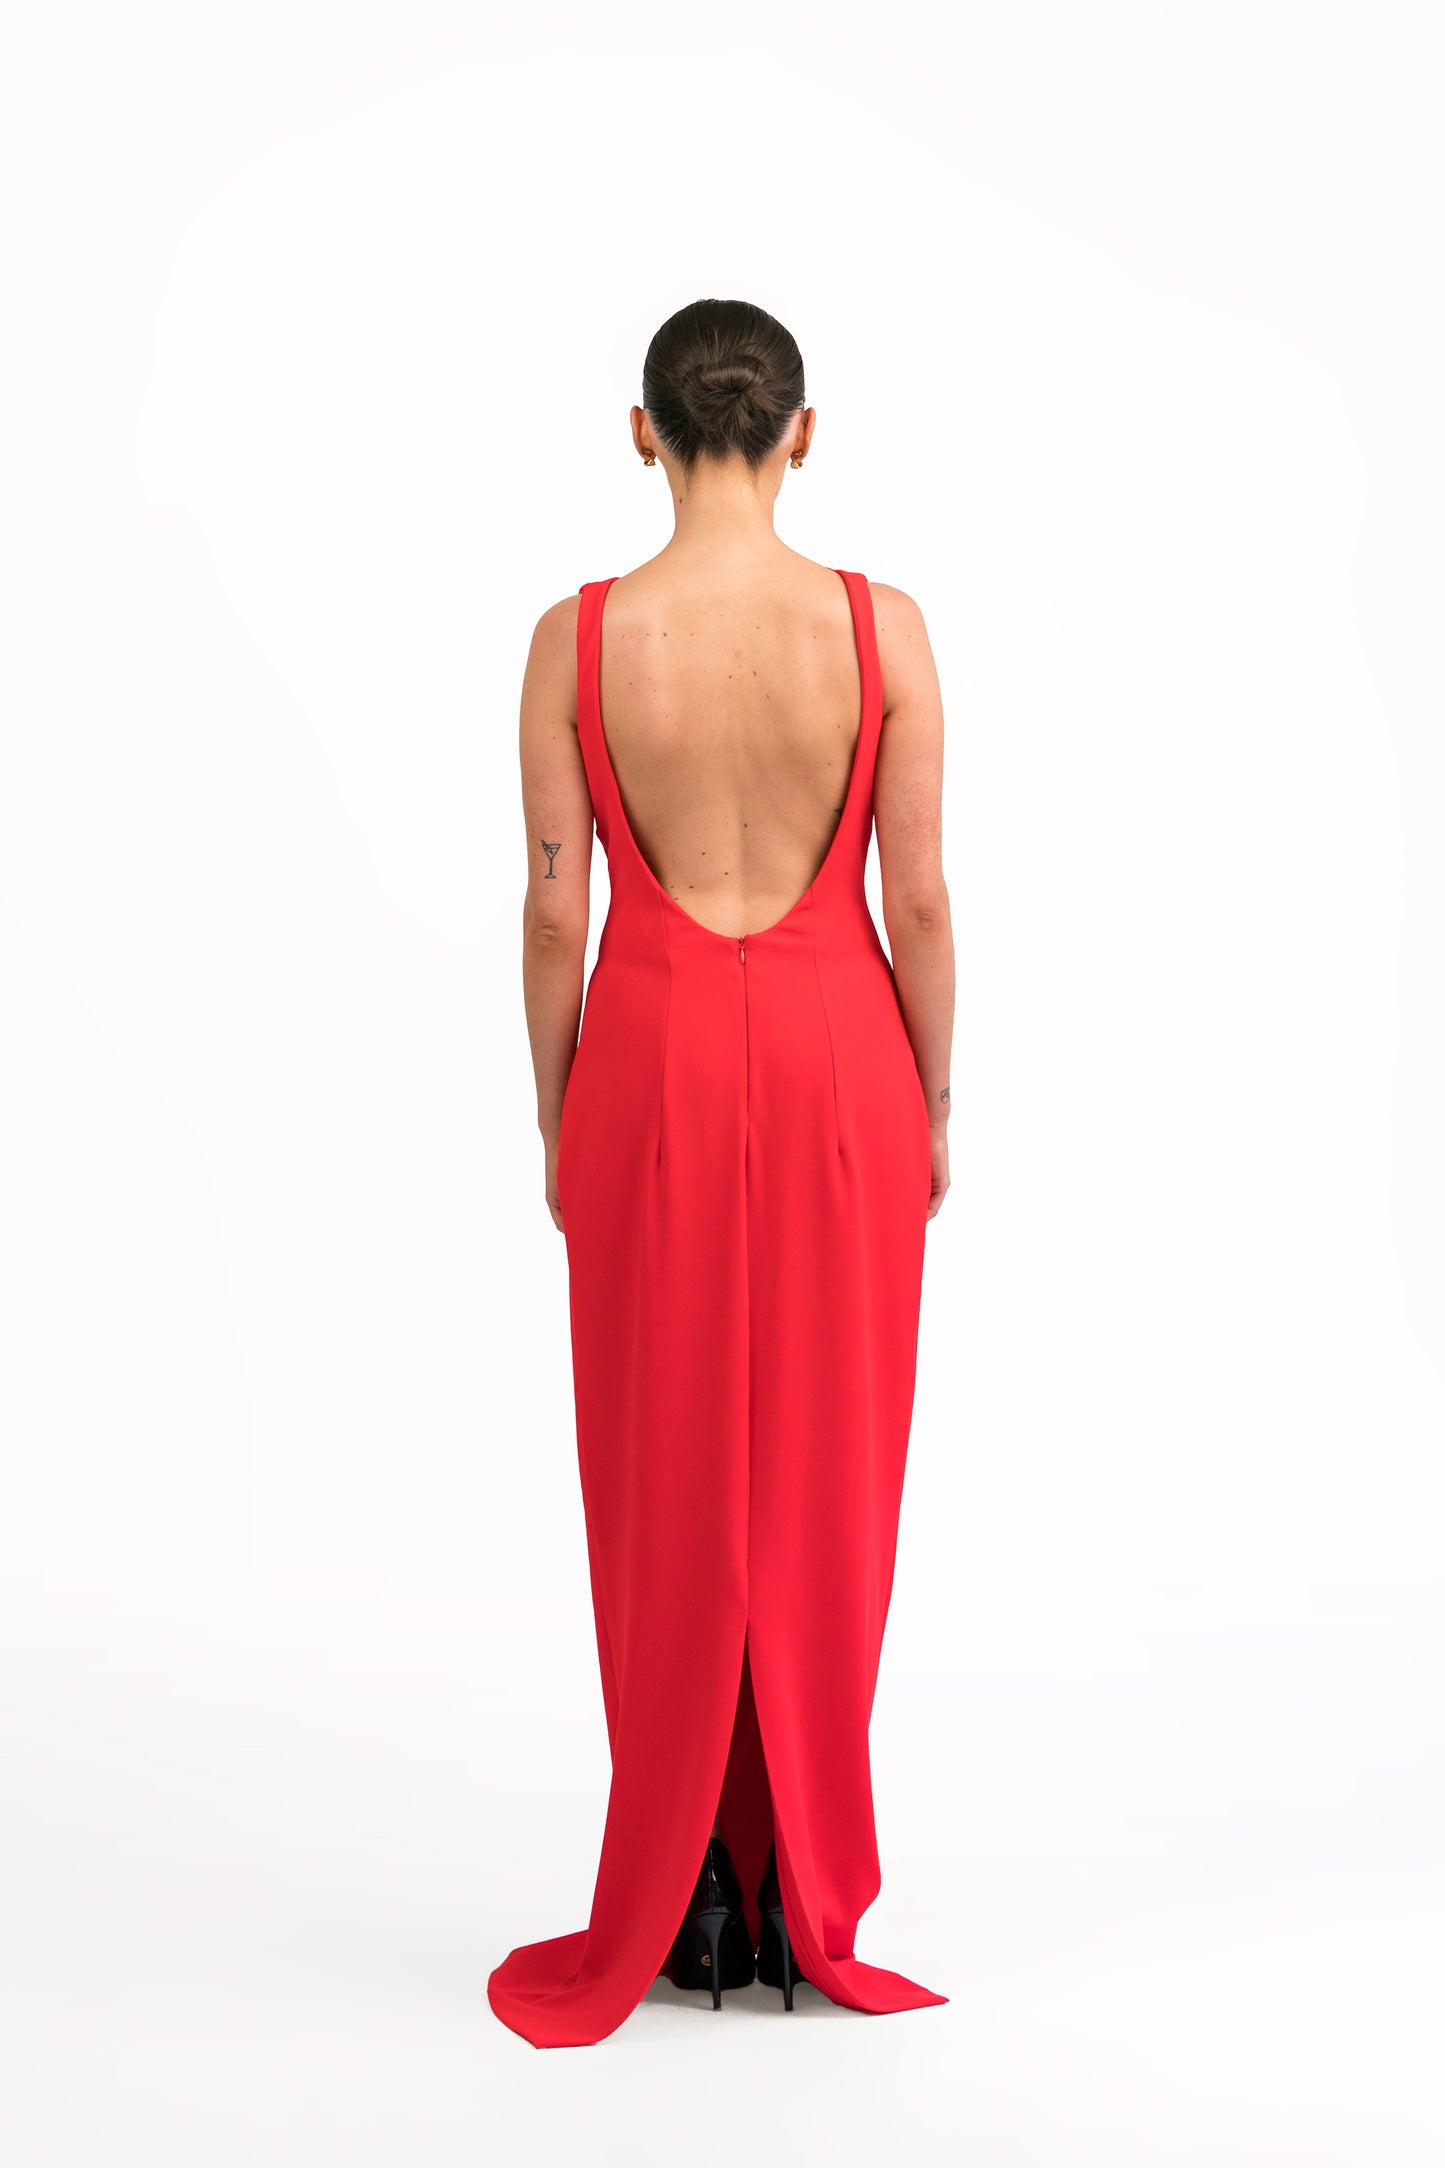 Verona Gown in Cherry Red